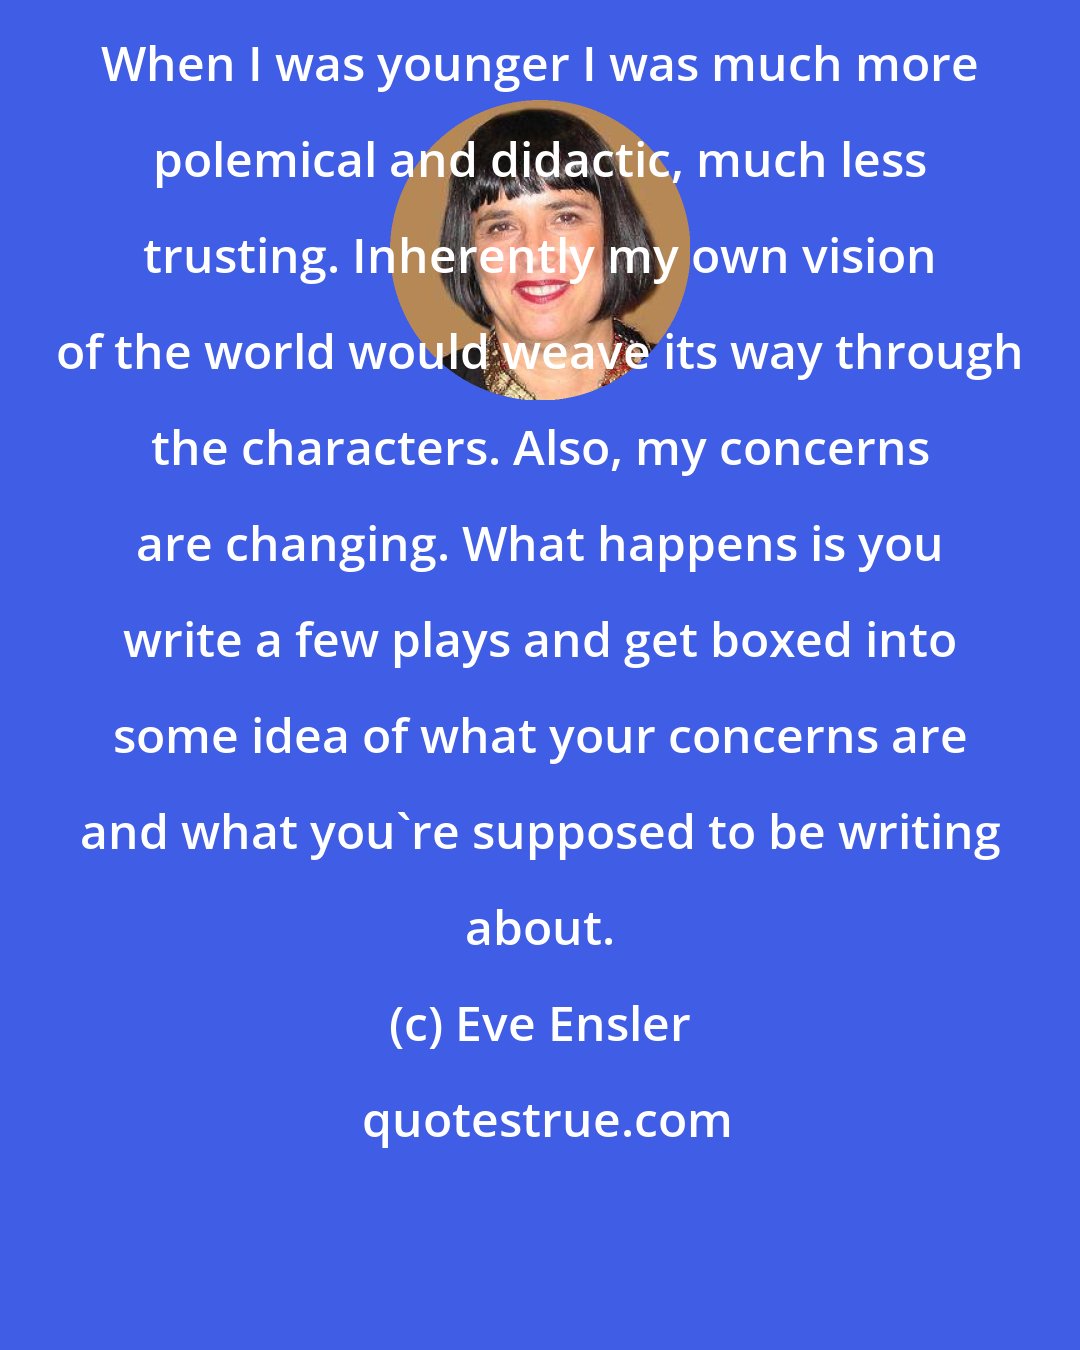 Eve Ensler: When I was younger I was much more polemical and didactic, much less trusting. Inherently my own vision of the world would weave its way through the characters. Also, my concerns are changing. What happens is you write a few plays and get boxed into some idea of what your concerns are and what you're supposed to be writing about.